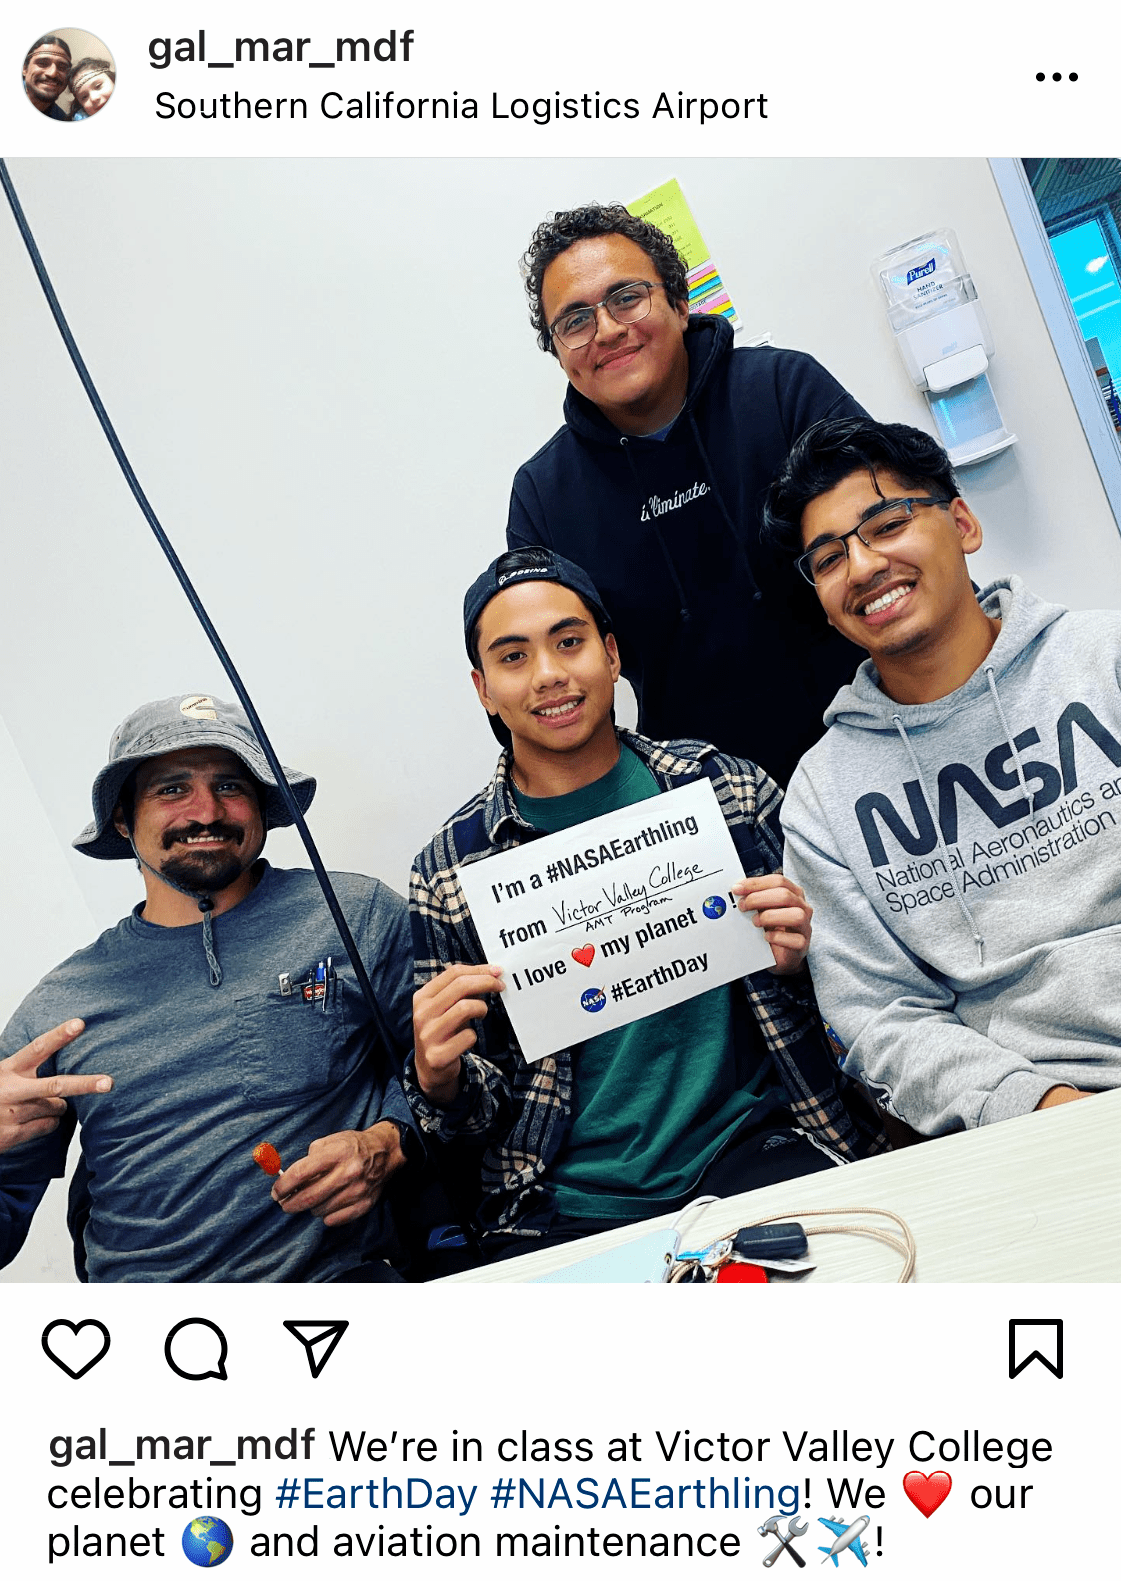 Mockup example of Facebook post with a picture of four young men in an office holding a sign that says "I'm a NASAEarthling from Victor Valley College. I love my planet. Earth Day"